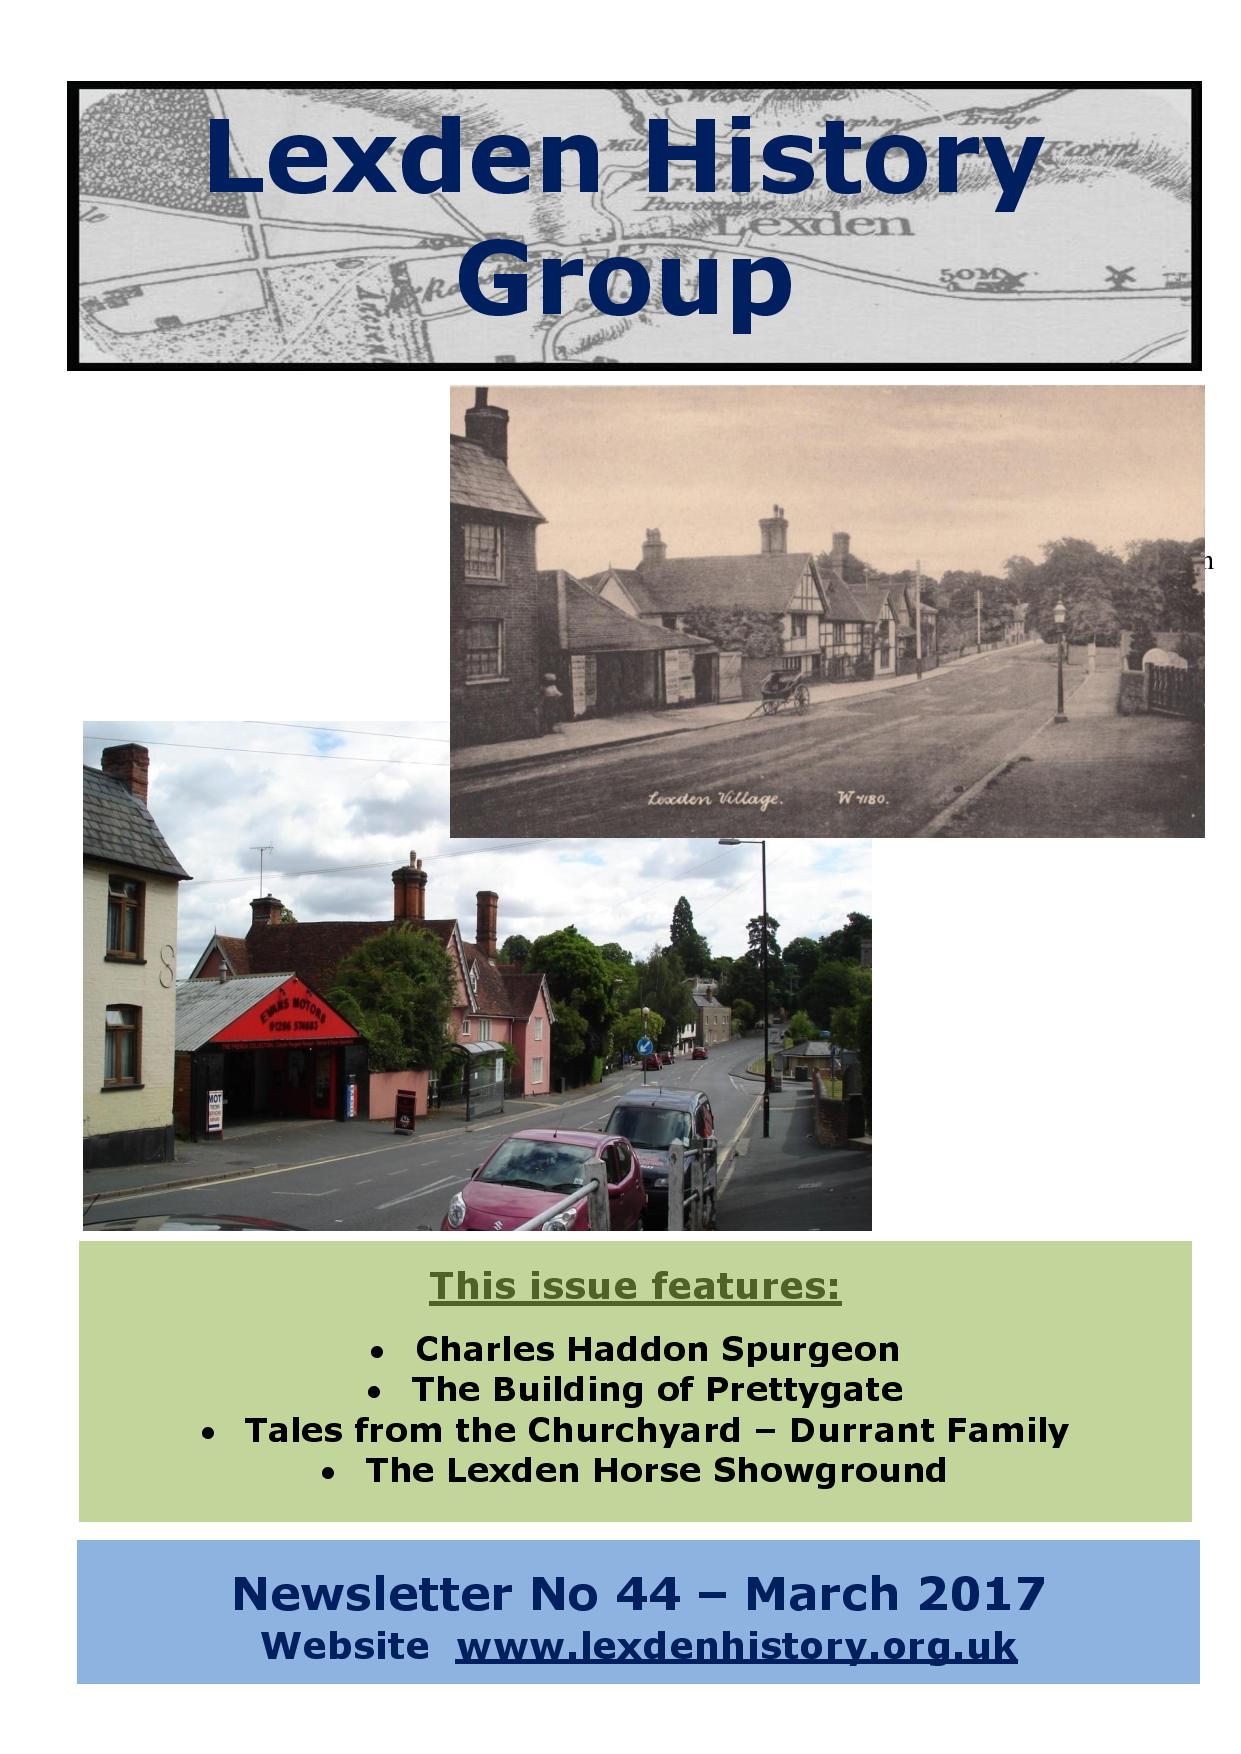 Lexden History Group Newsletter, March 2017 Issue 44